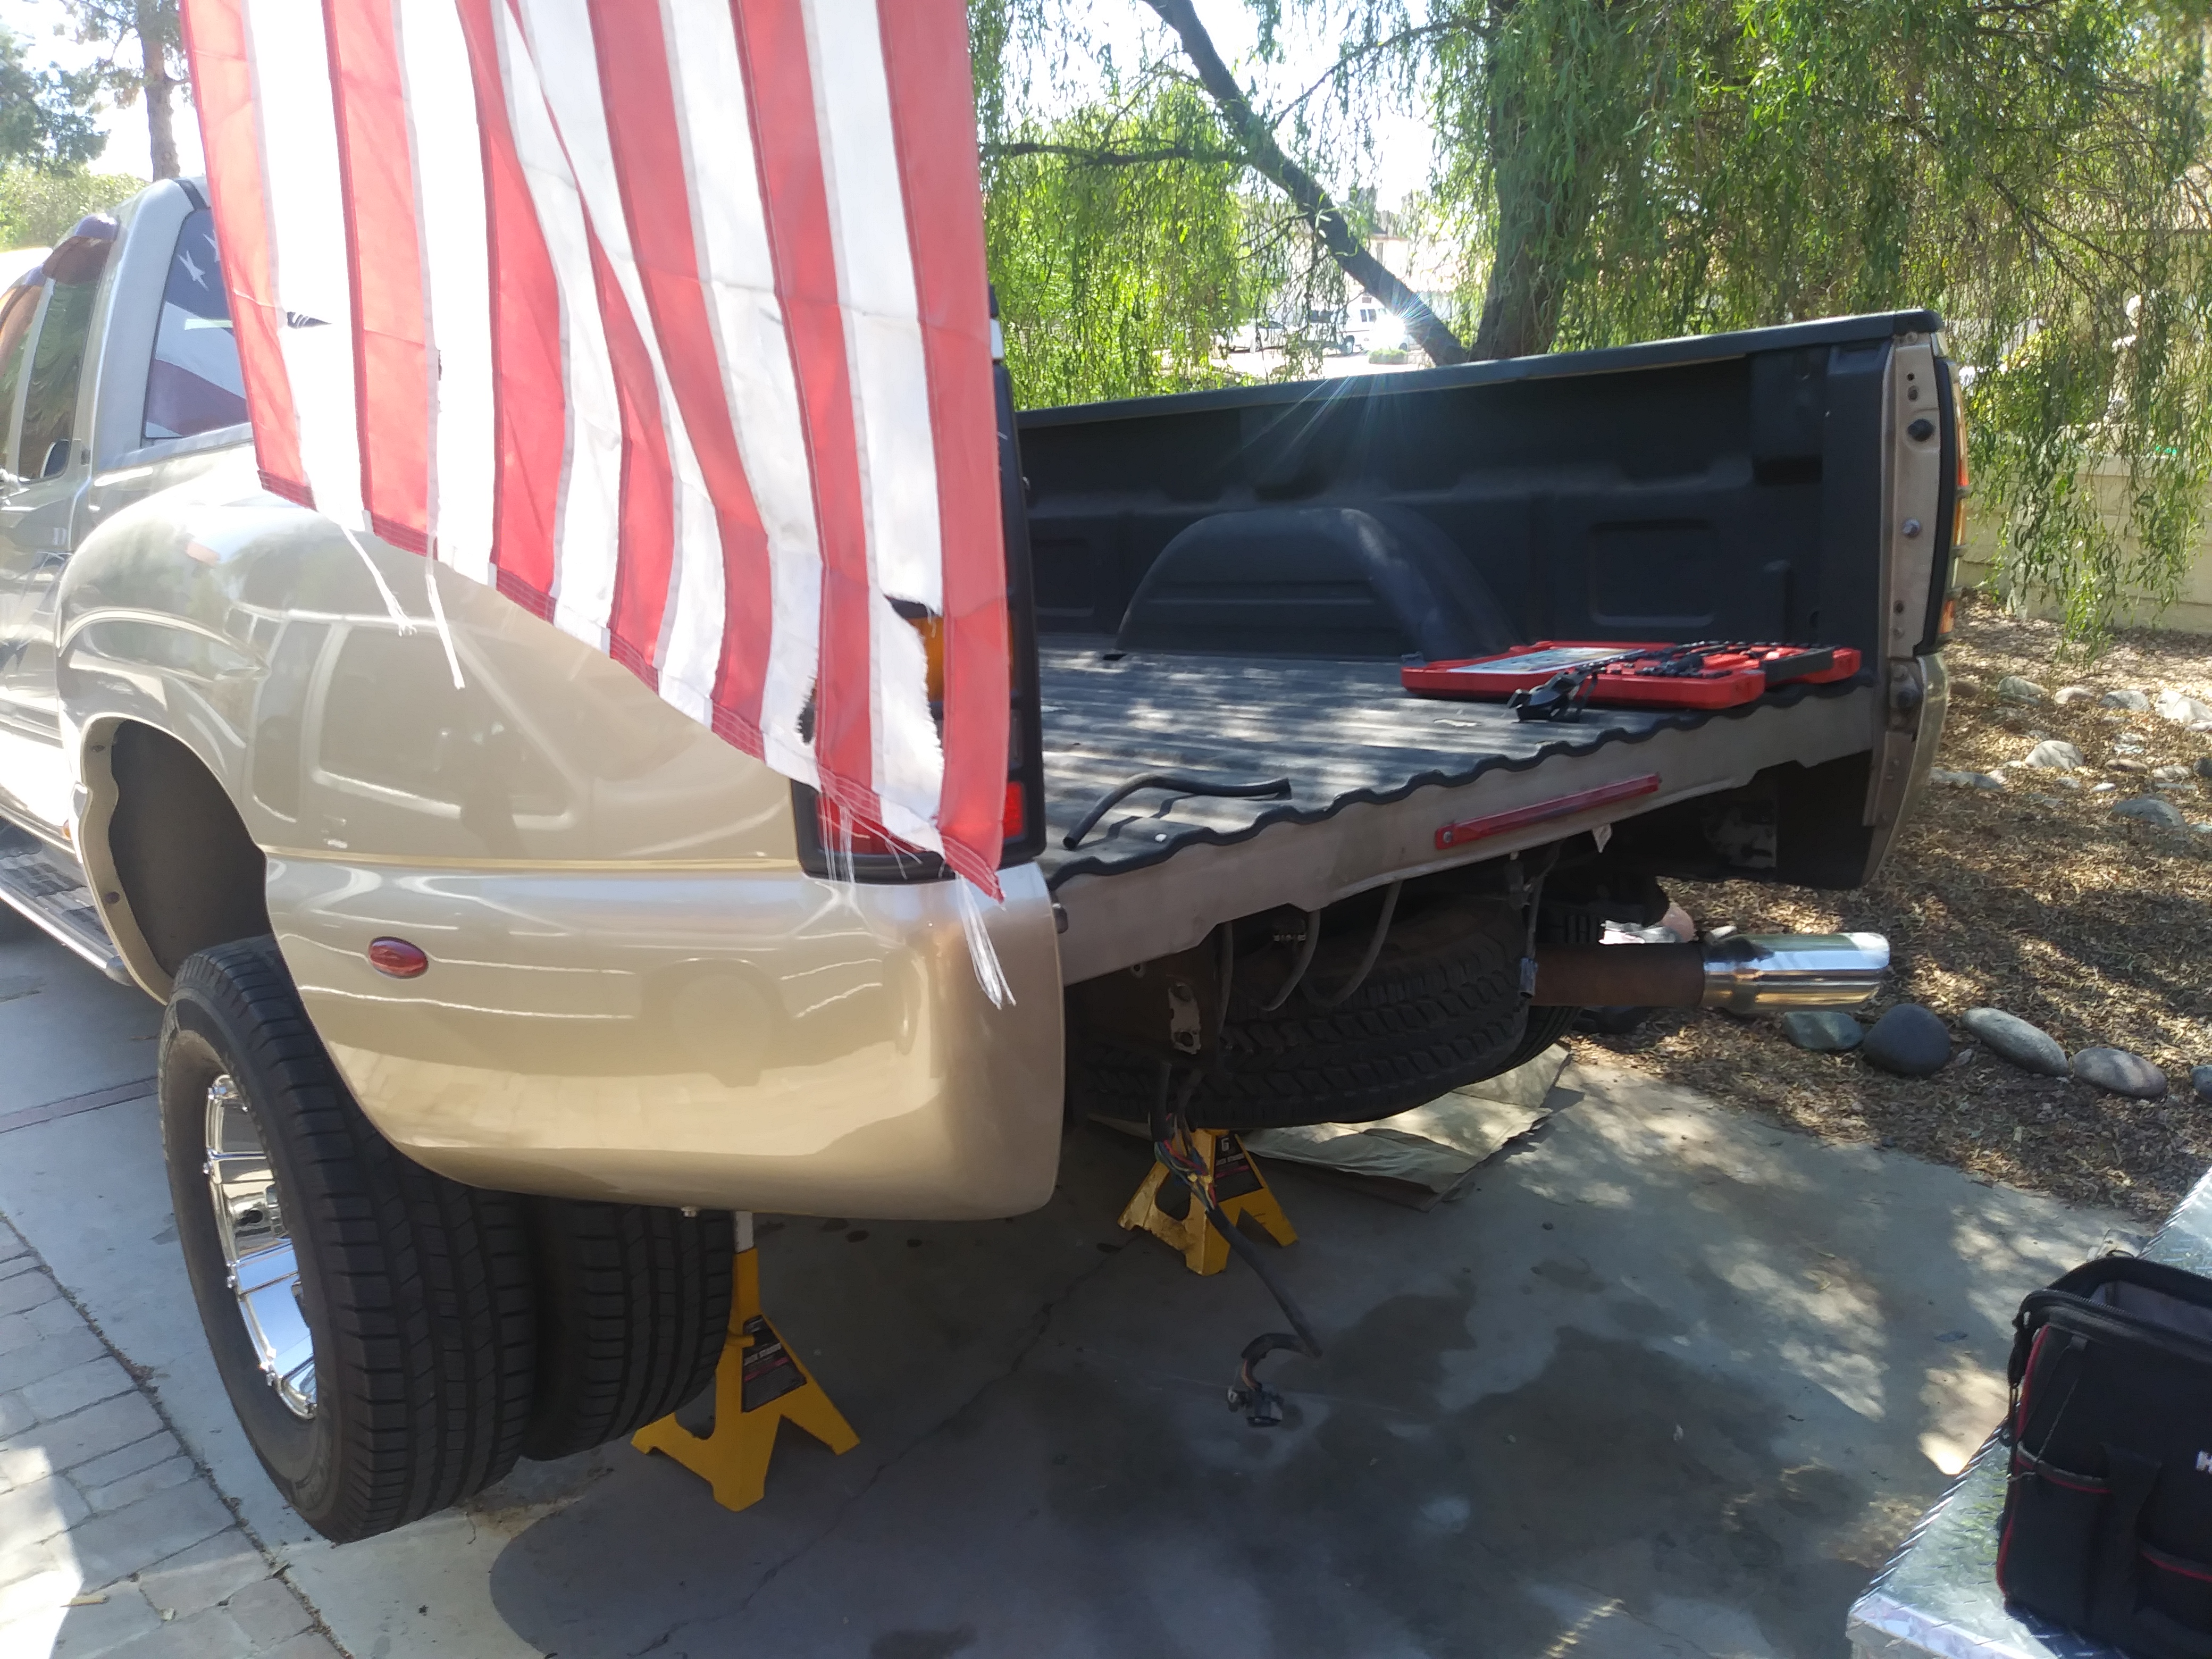 PROGRESS ON THE NEW TRUCK TO BETTER SERVICE AZ – Speedy Response Towing and Roadside Services